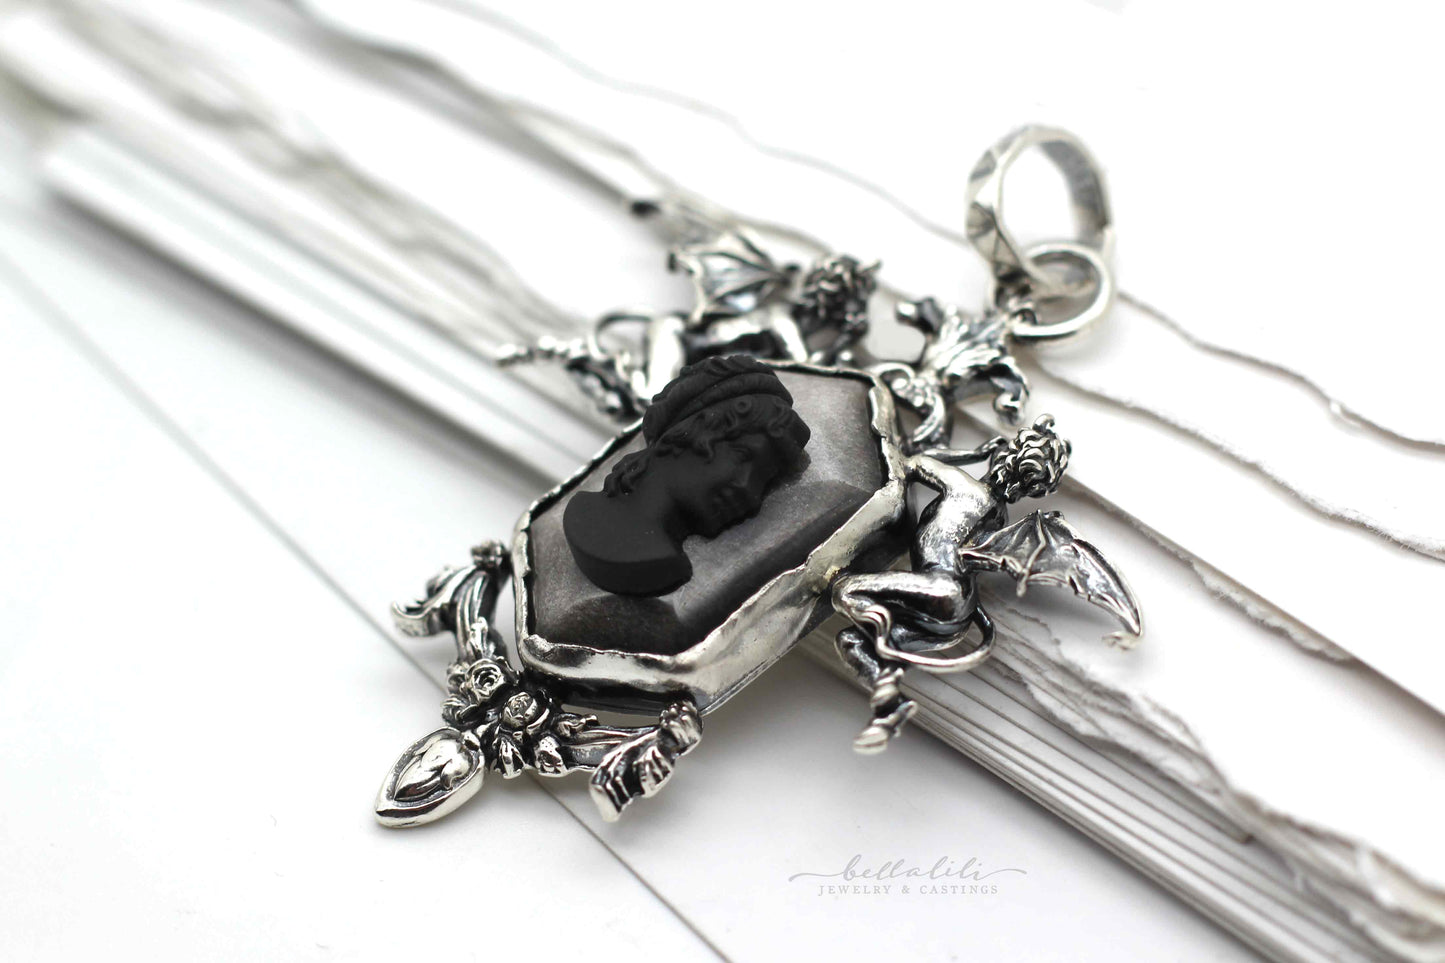 Femme Fatale, Morally Gray, Booktok inspired Sinner Necklace